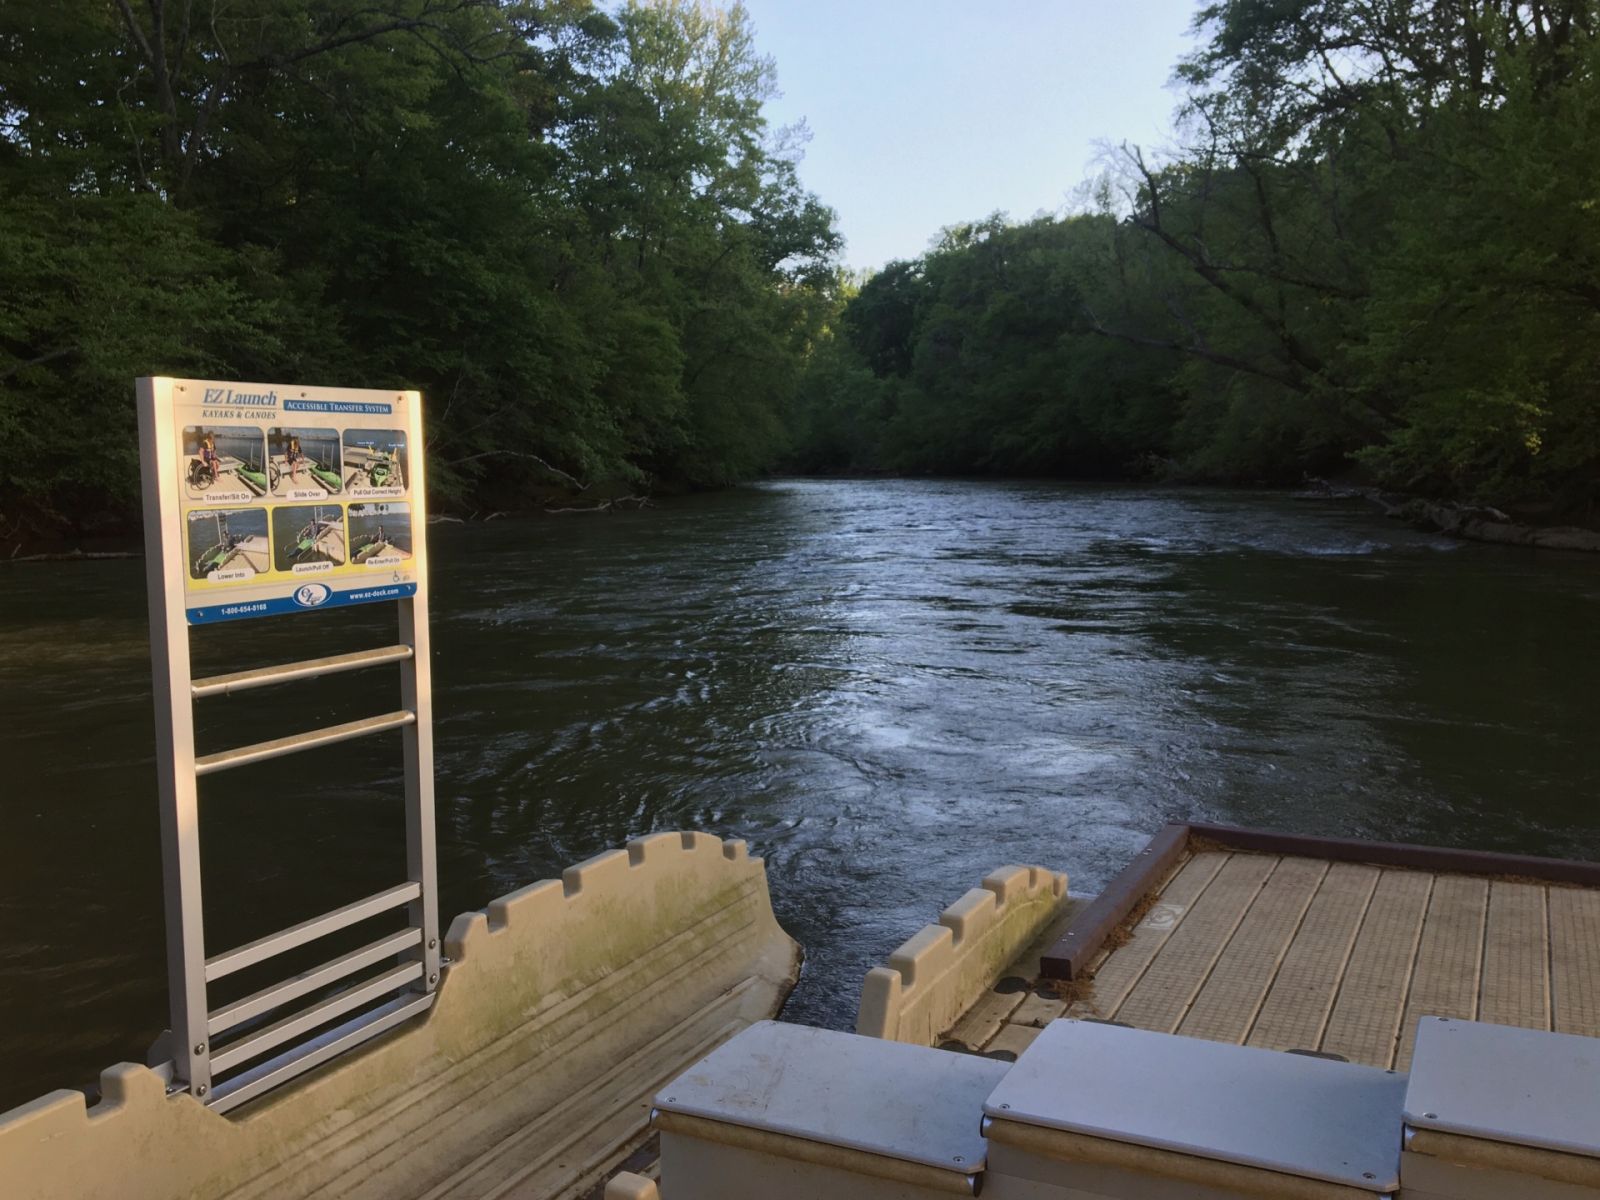 In 2019, Anderson County opened a second ADA-accessible boat launch, creating a quarter mile kayaking and tubing loop at Dolly Cooper Park. (Photo/Molly Hulsey)